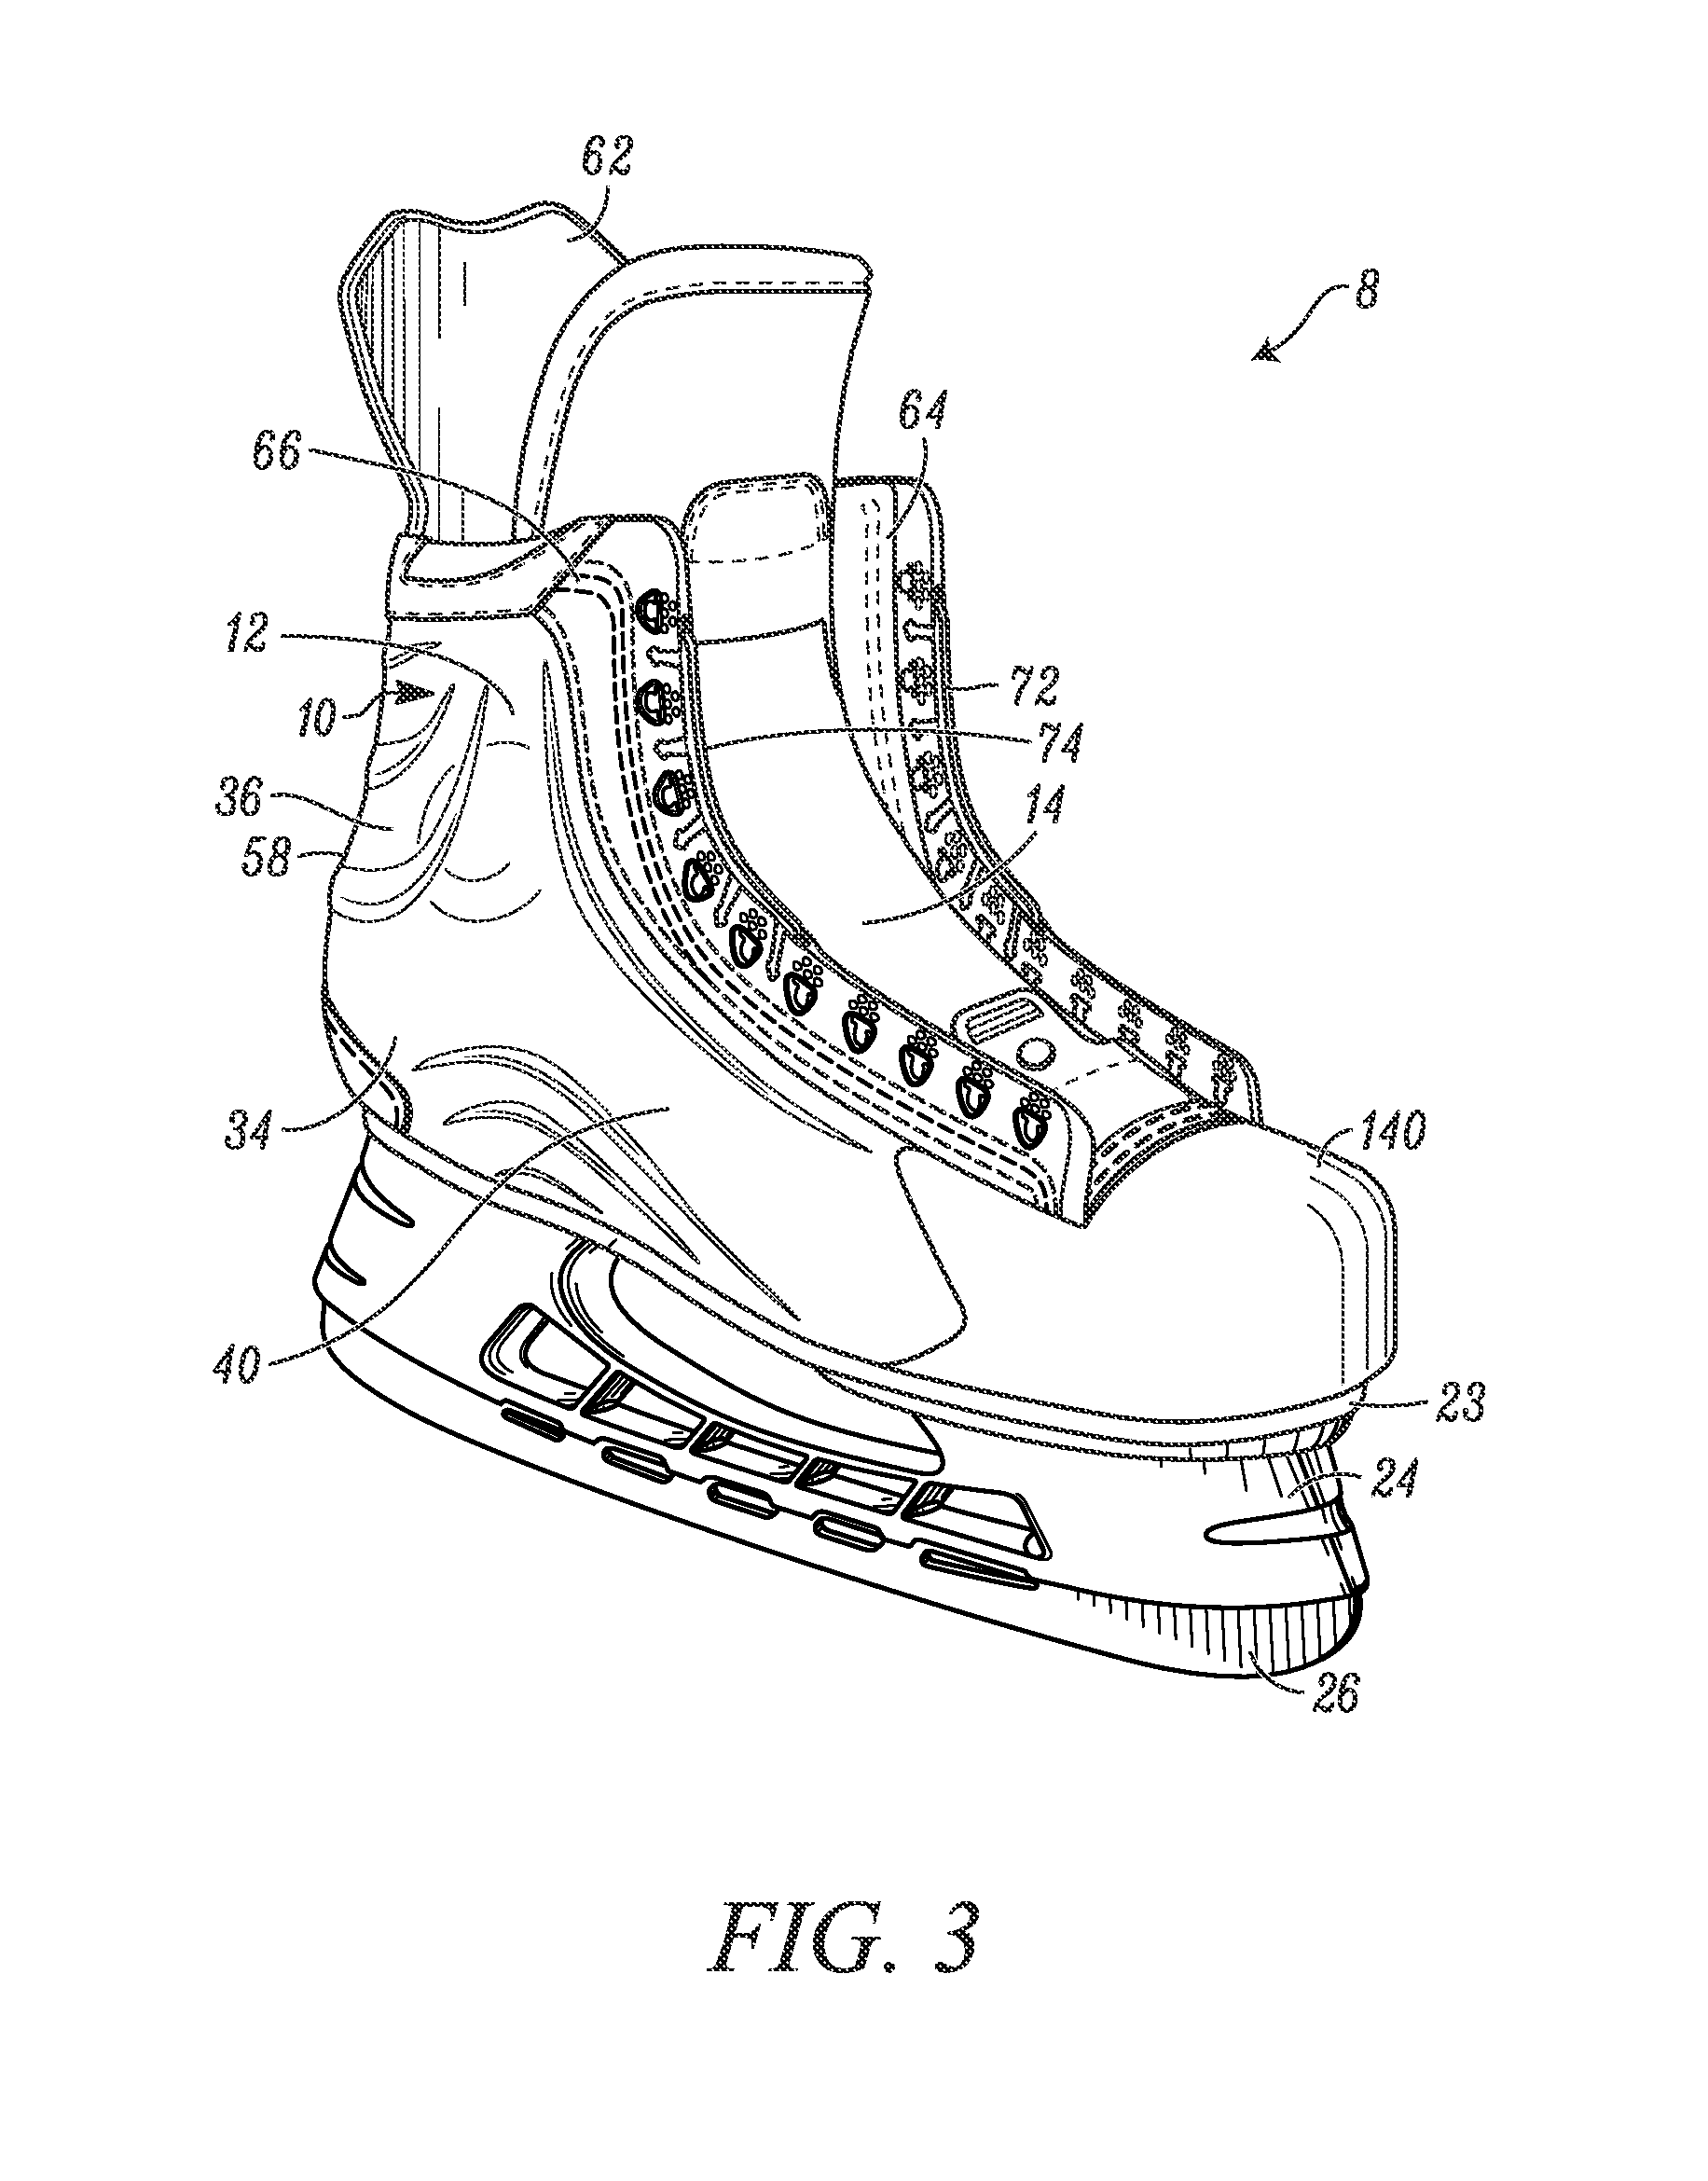 Skate boot having a toe cap with rear extensions